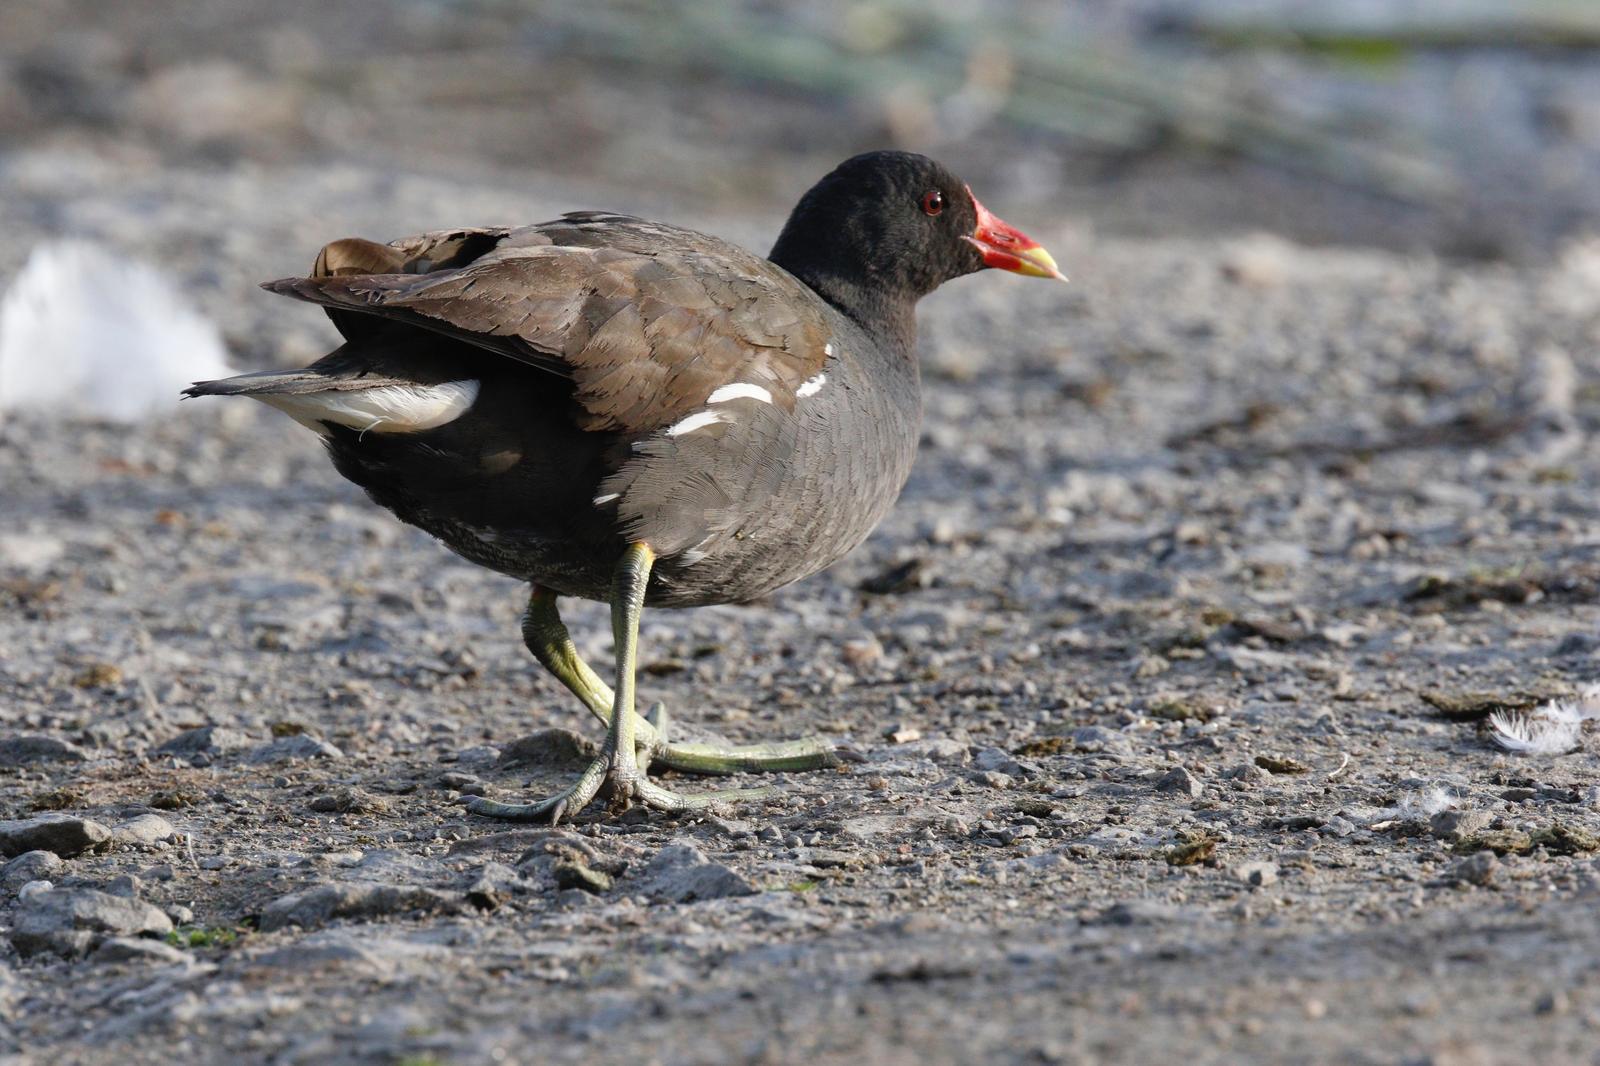 Eurasian Moorhen Photo by Emily Willoughby